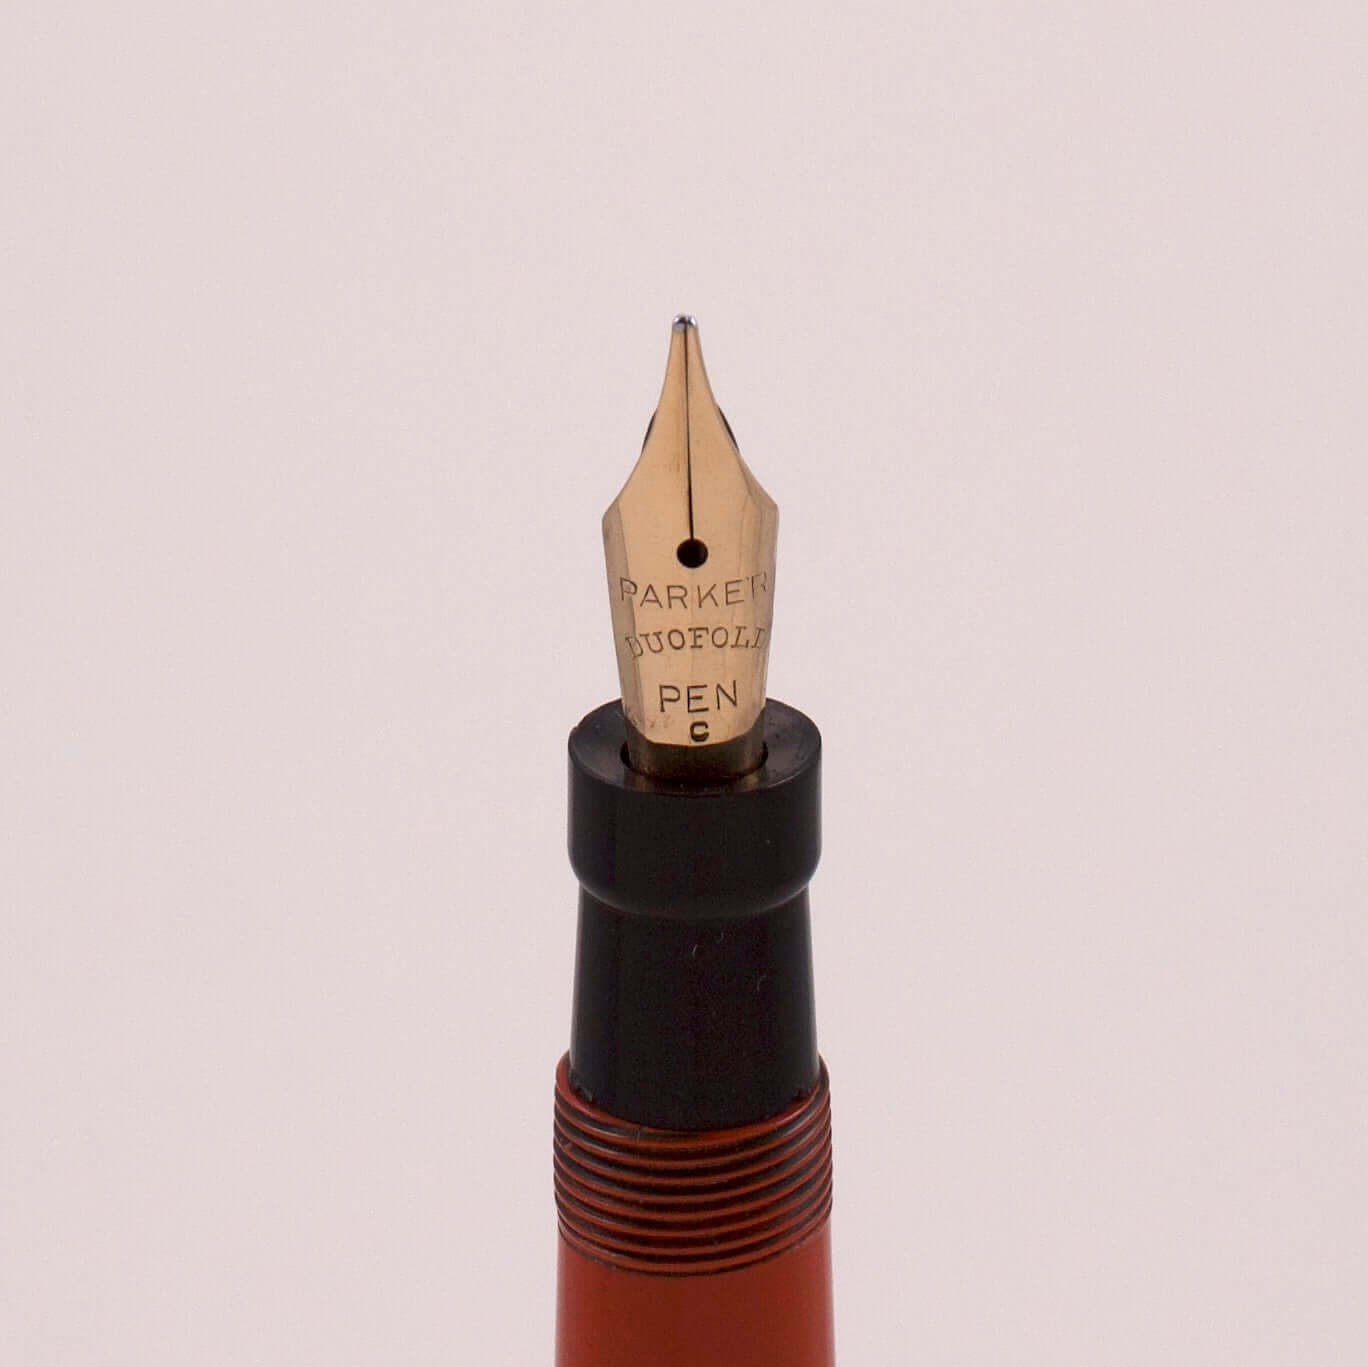 Parker Lady Duofold Ring Top. Orange Permanite with button filler. Restored. Medium 14K nib. Type: Button Fill Fountain Pen Product Name: Parker Lady Duofold Manufacture Year: 1930's Length: 4 1/2 inch Filling System: Button Filler; Restored with new sac.